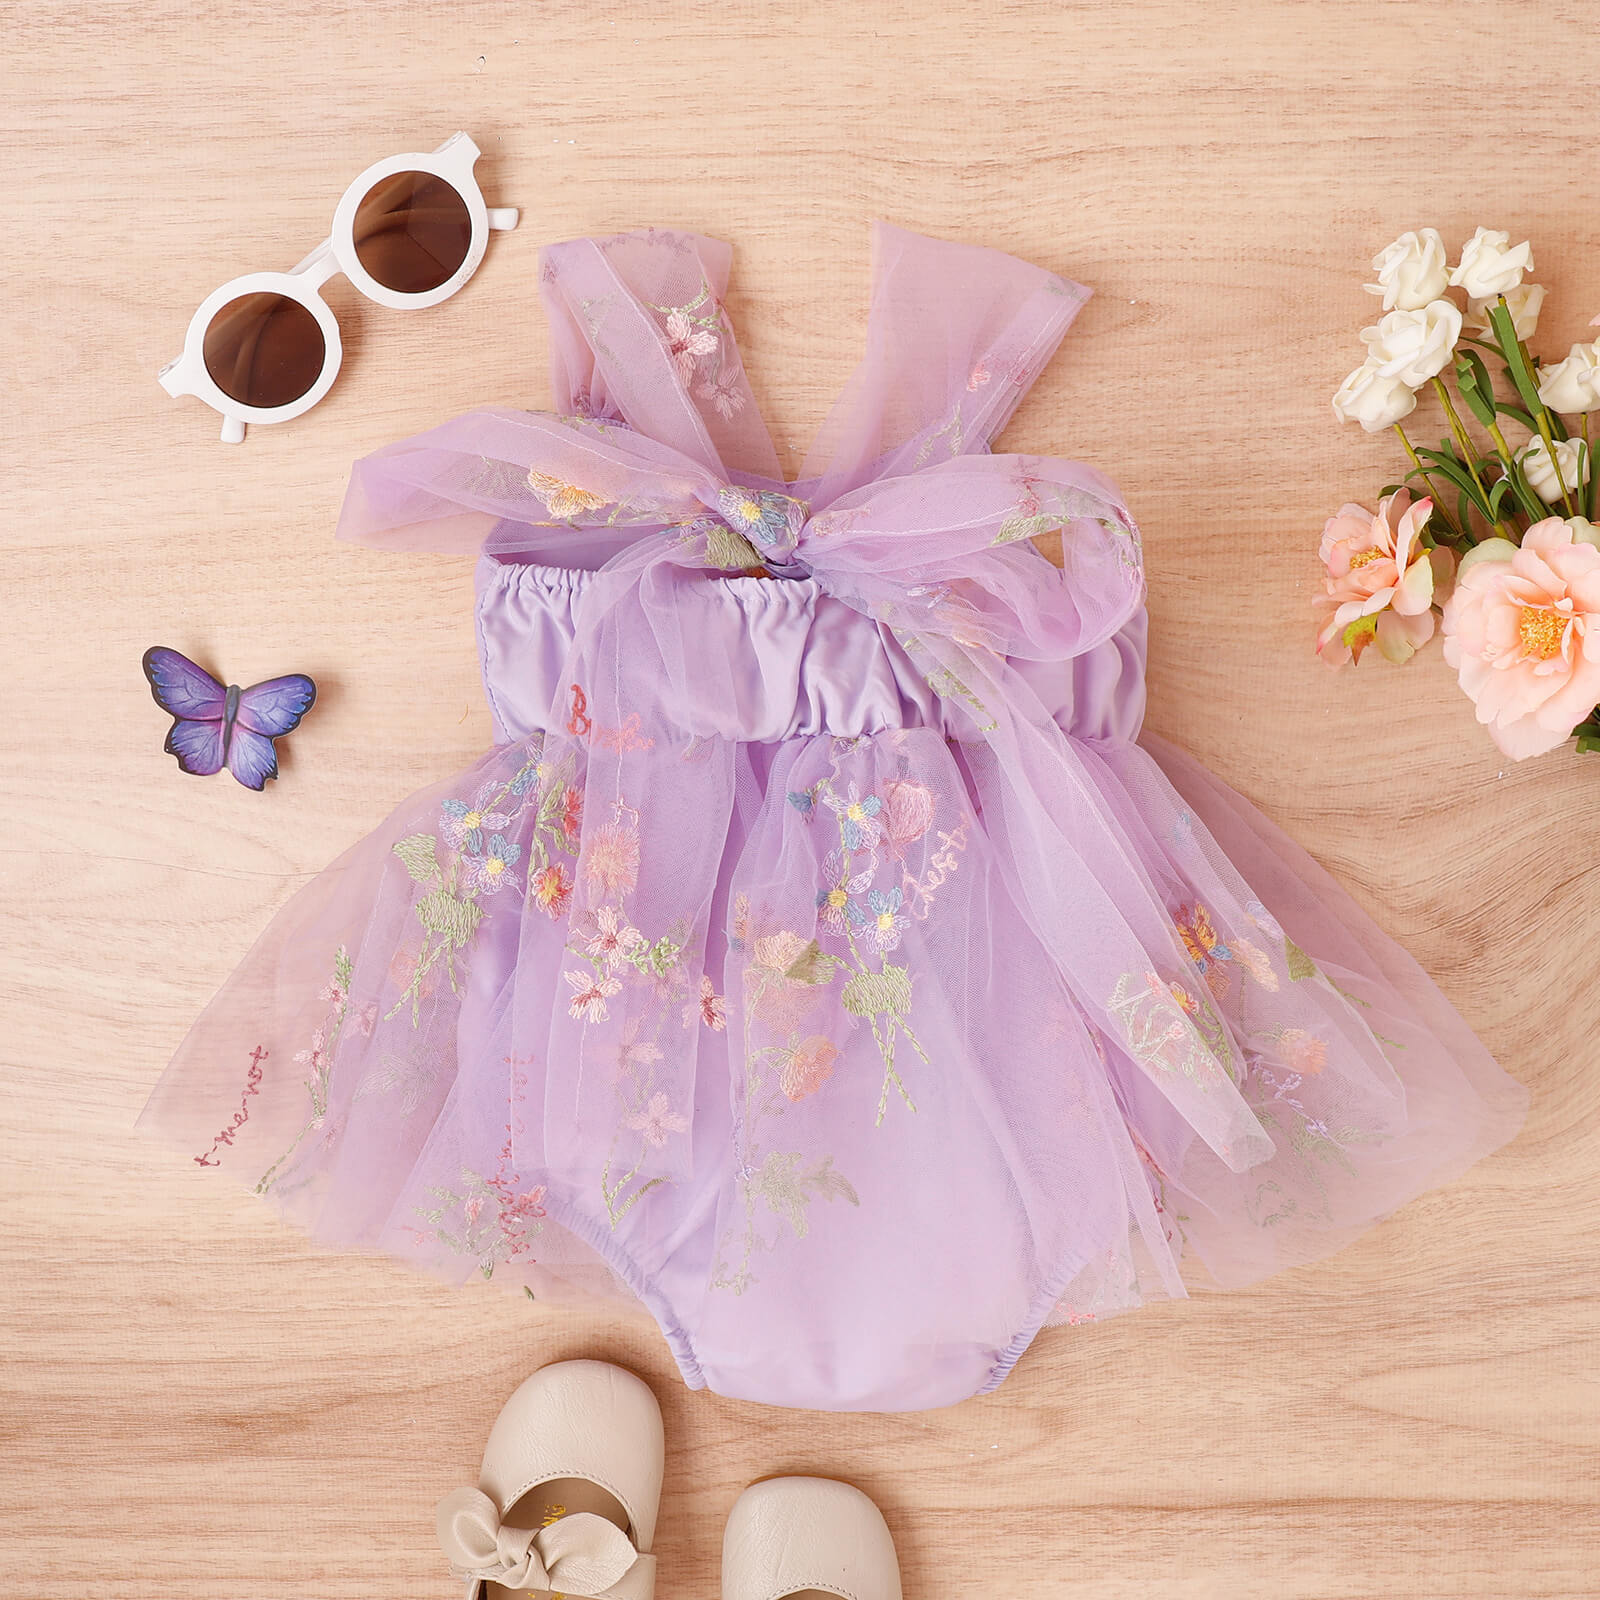 Sweet Baby Girl Embroidery Romper Dress